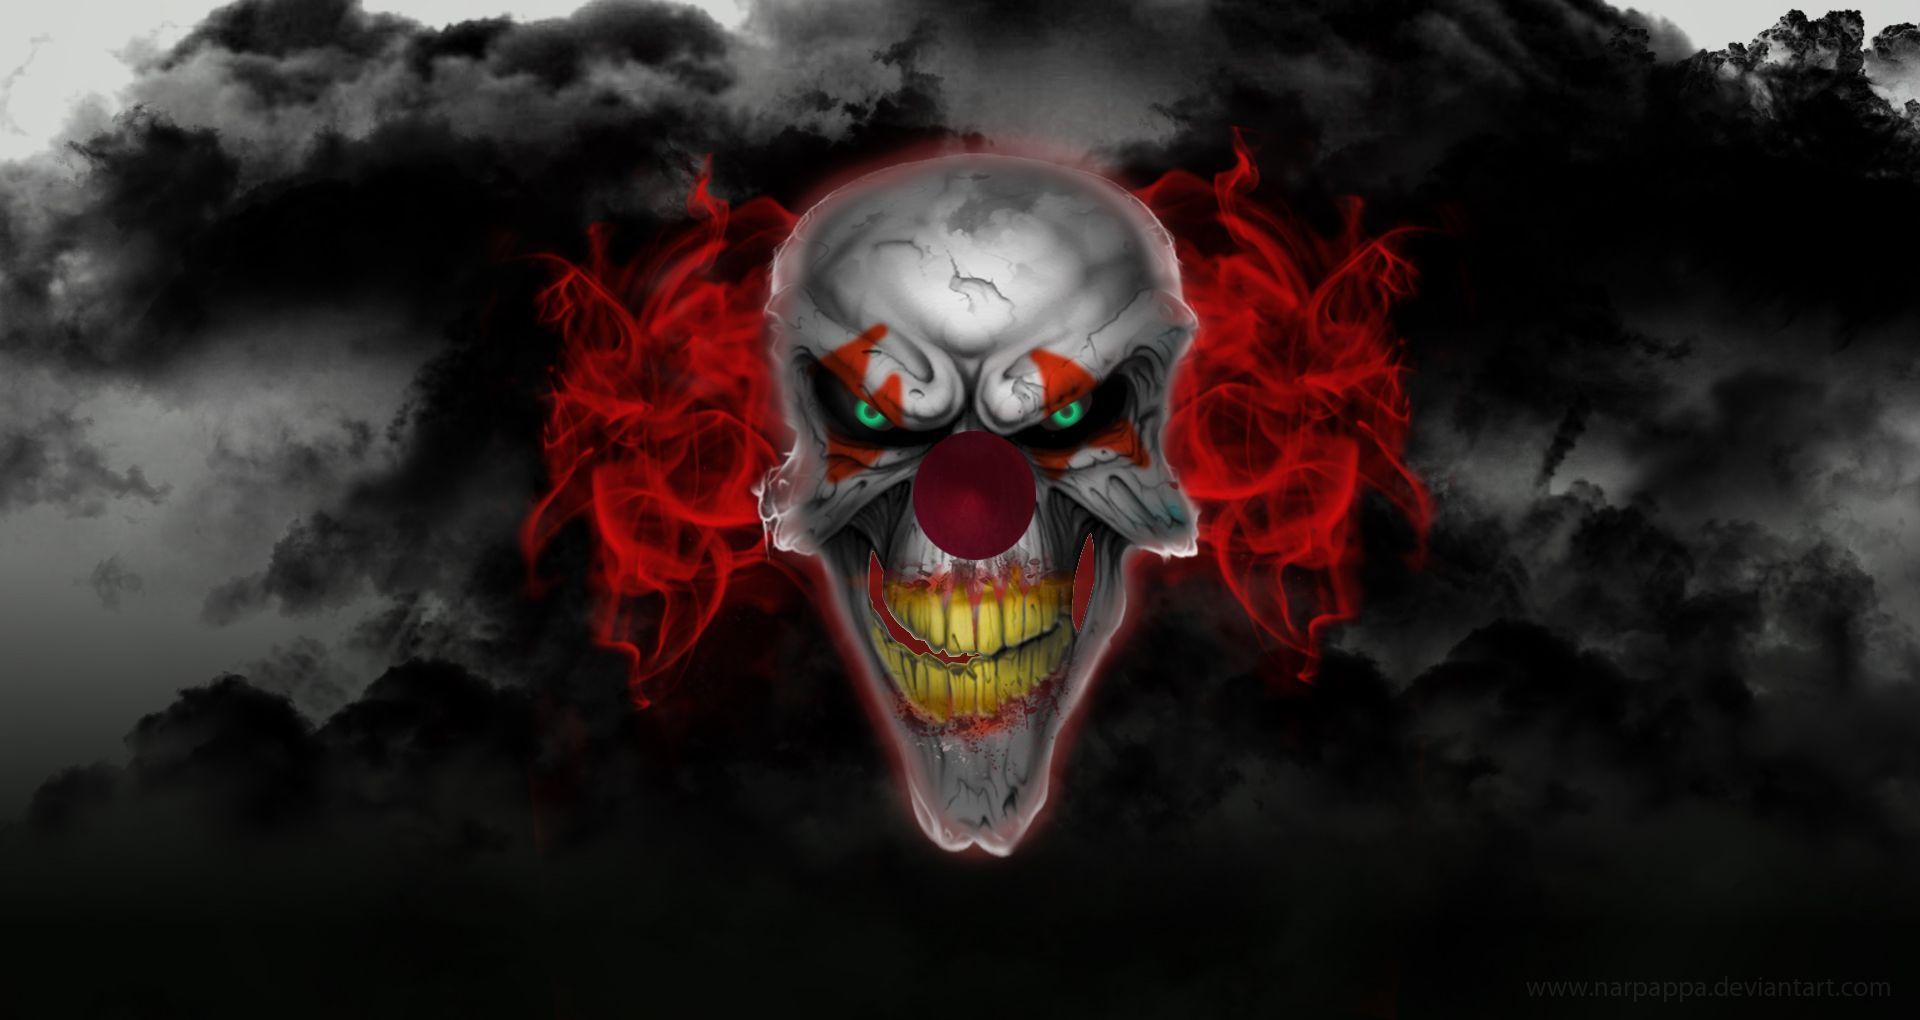 Scary Clown with Red Hair wallpaper from Clowns wallpaper. Evil